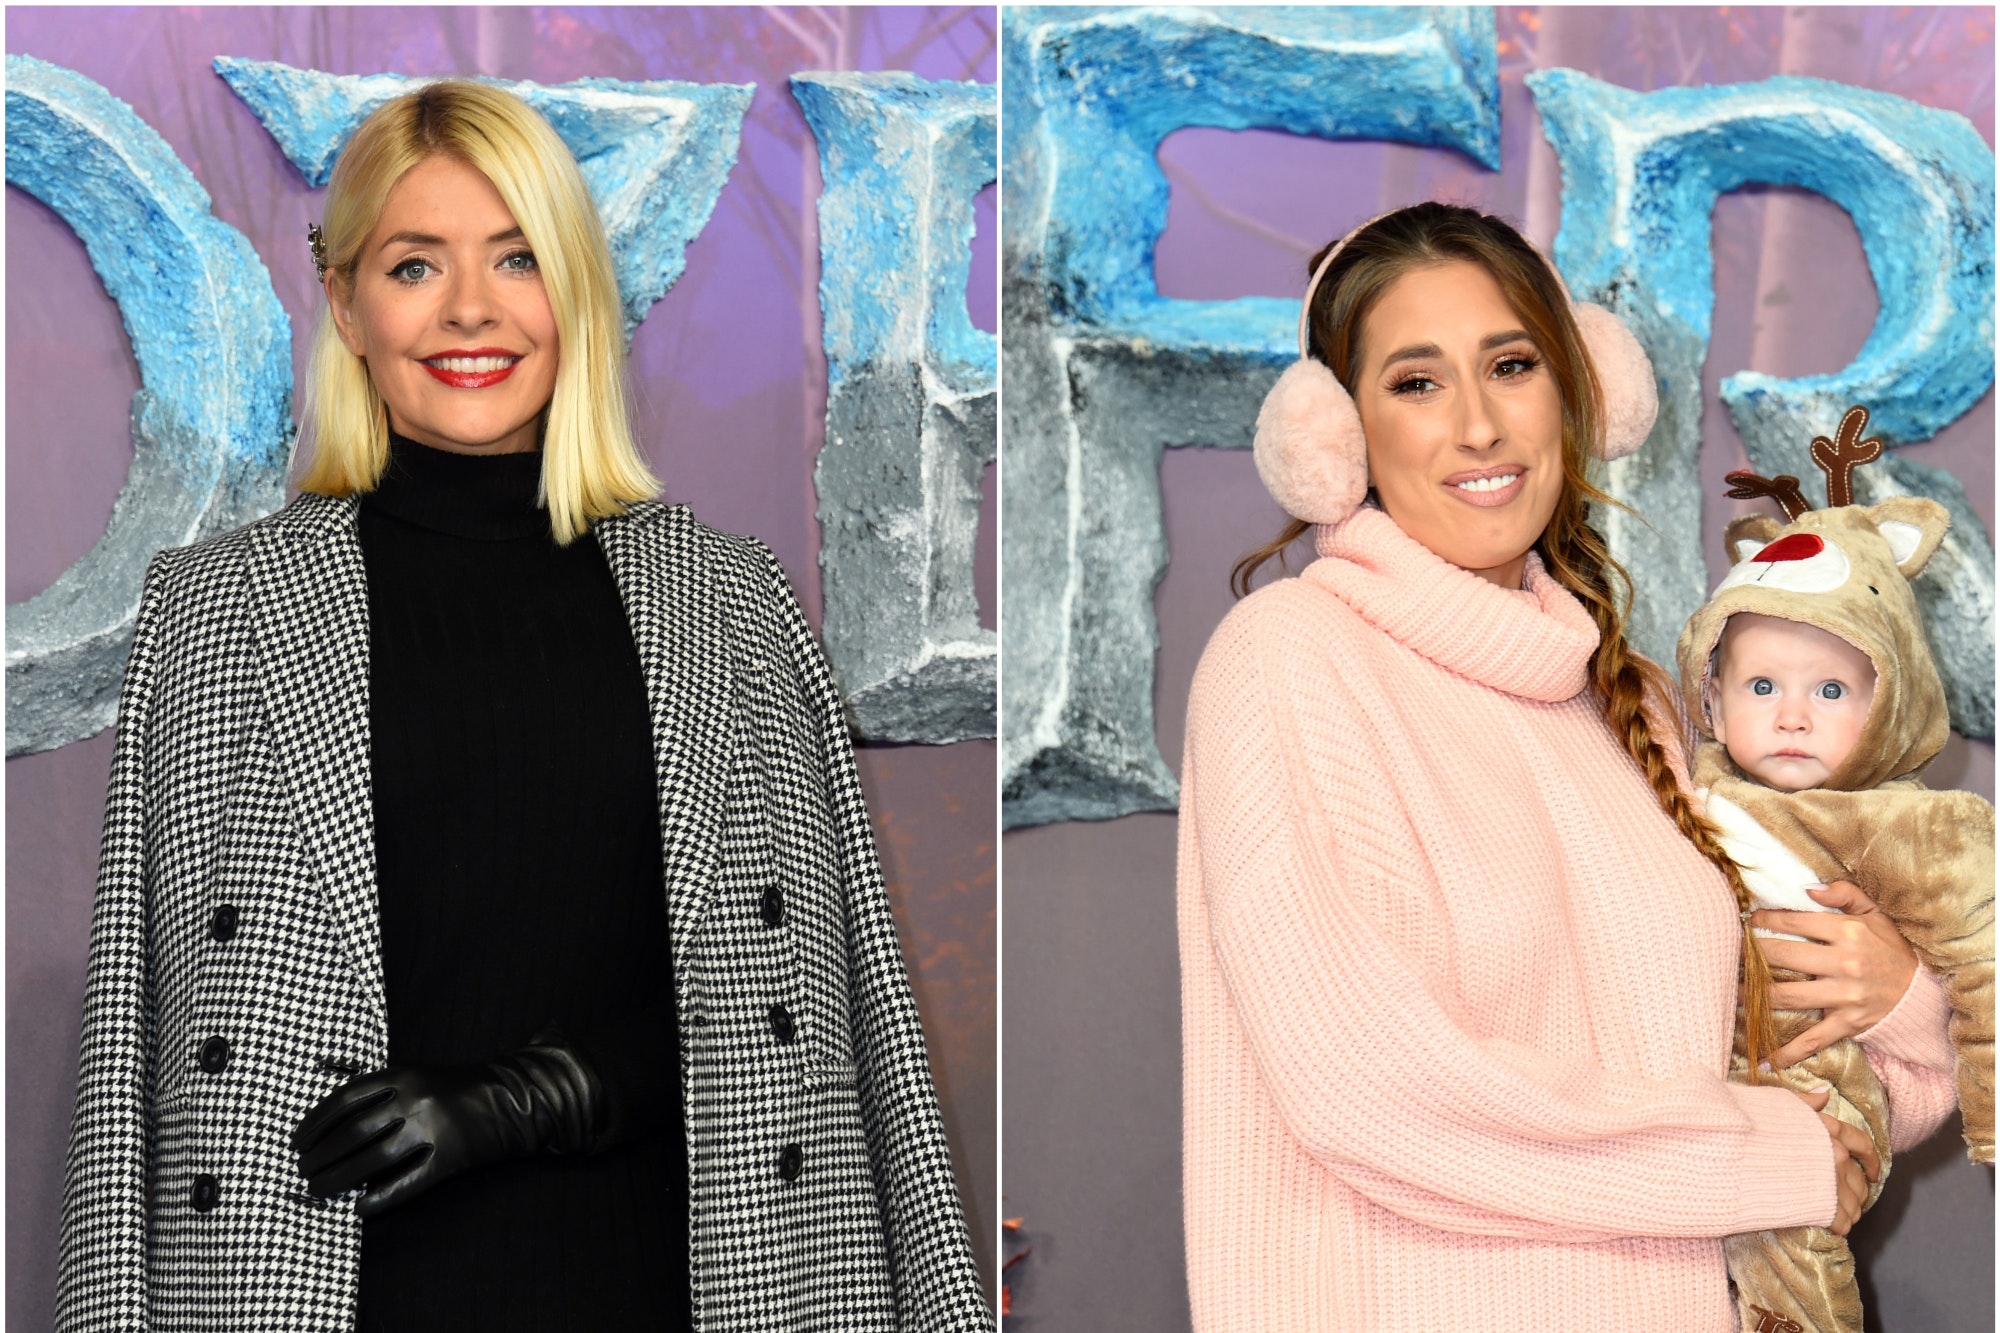 Holly Willoughby and Stacey Solomon among stars at Frozen premiere - St Helens Star